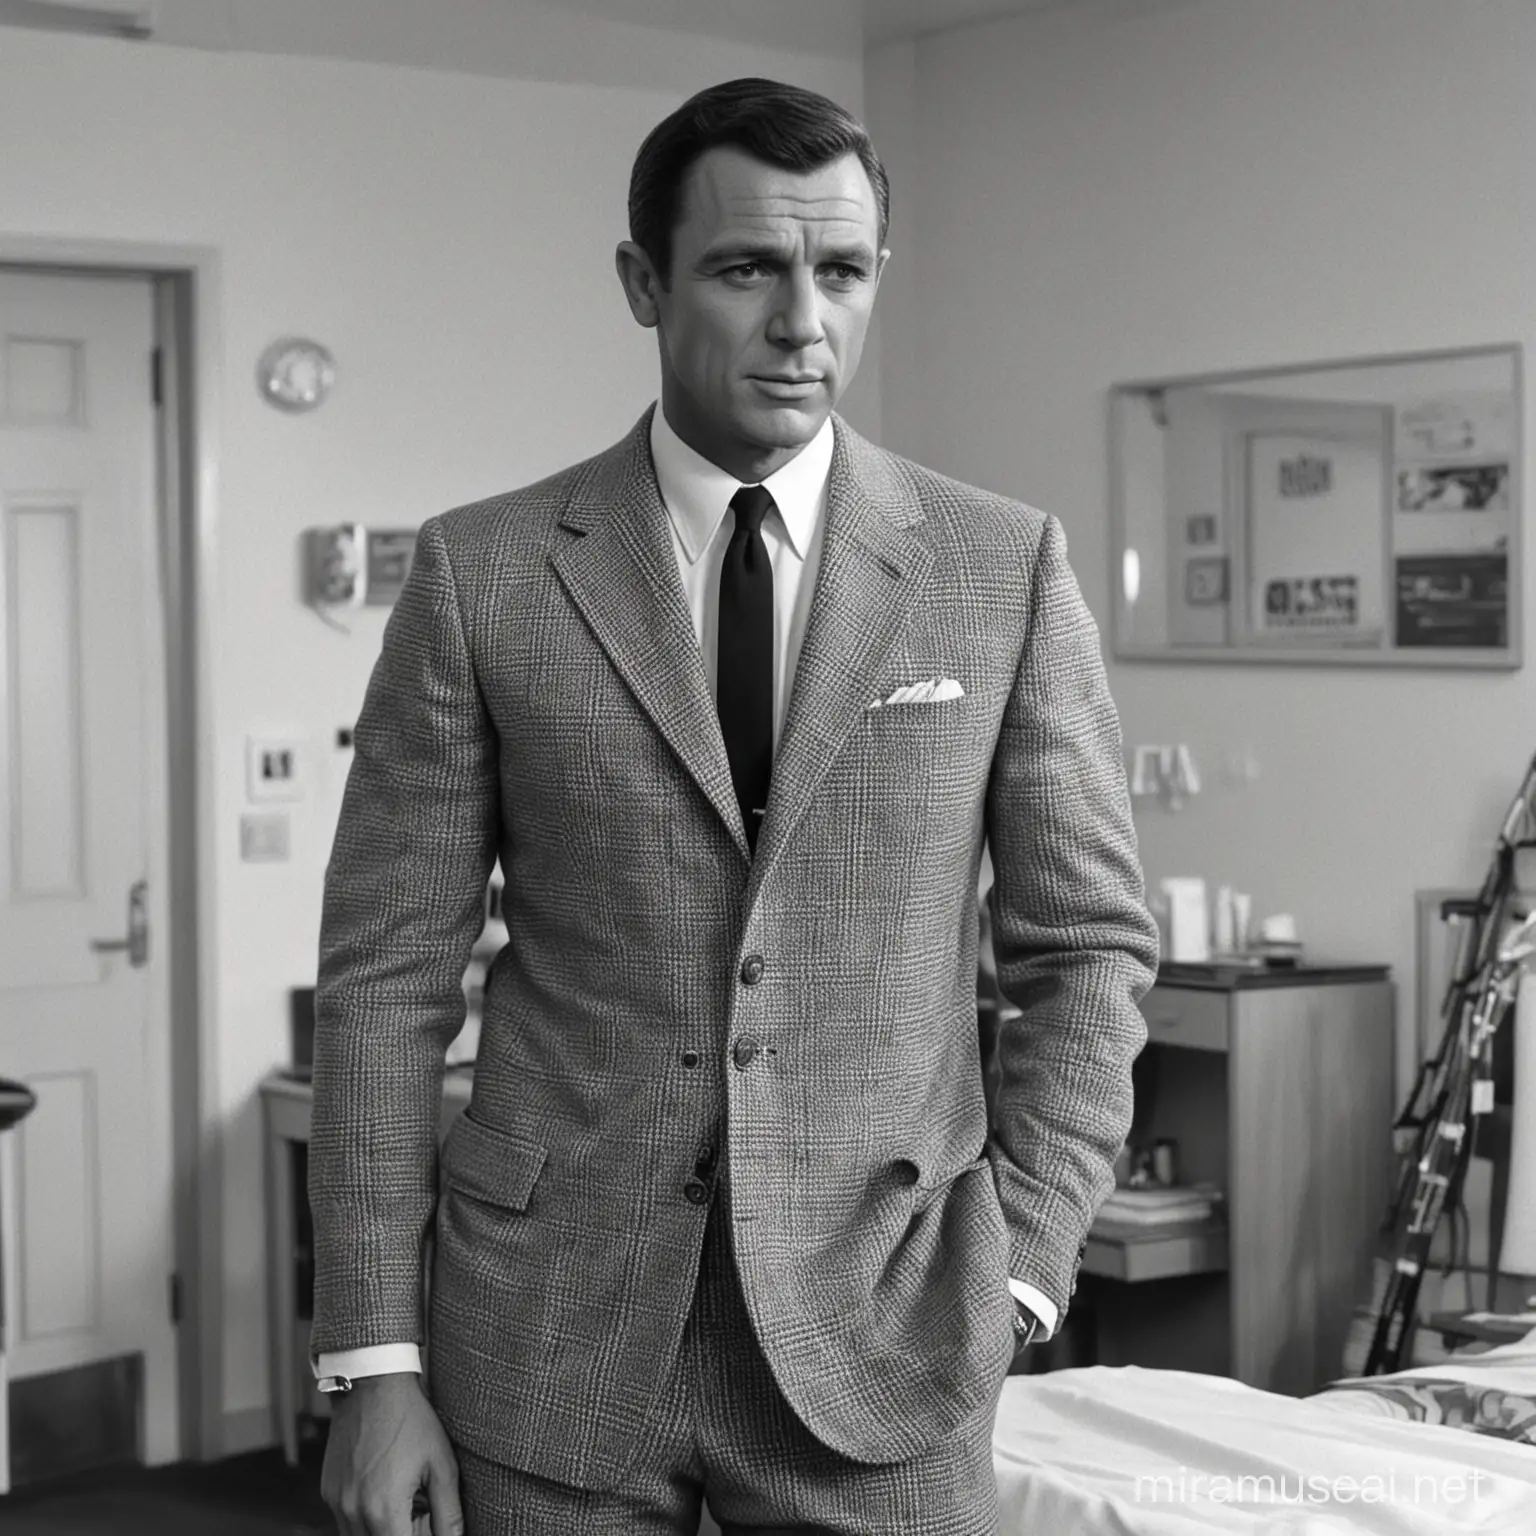 James Bond at Shrublands Clinic in 1964 in Iconic Black and White Houndstooth Suit